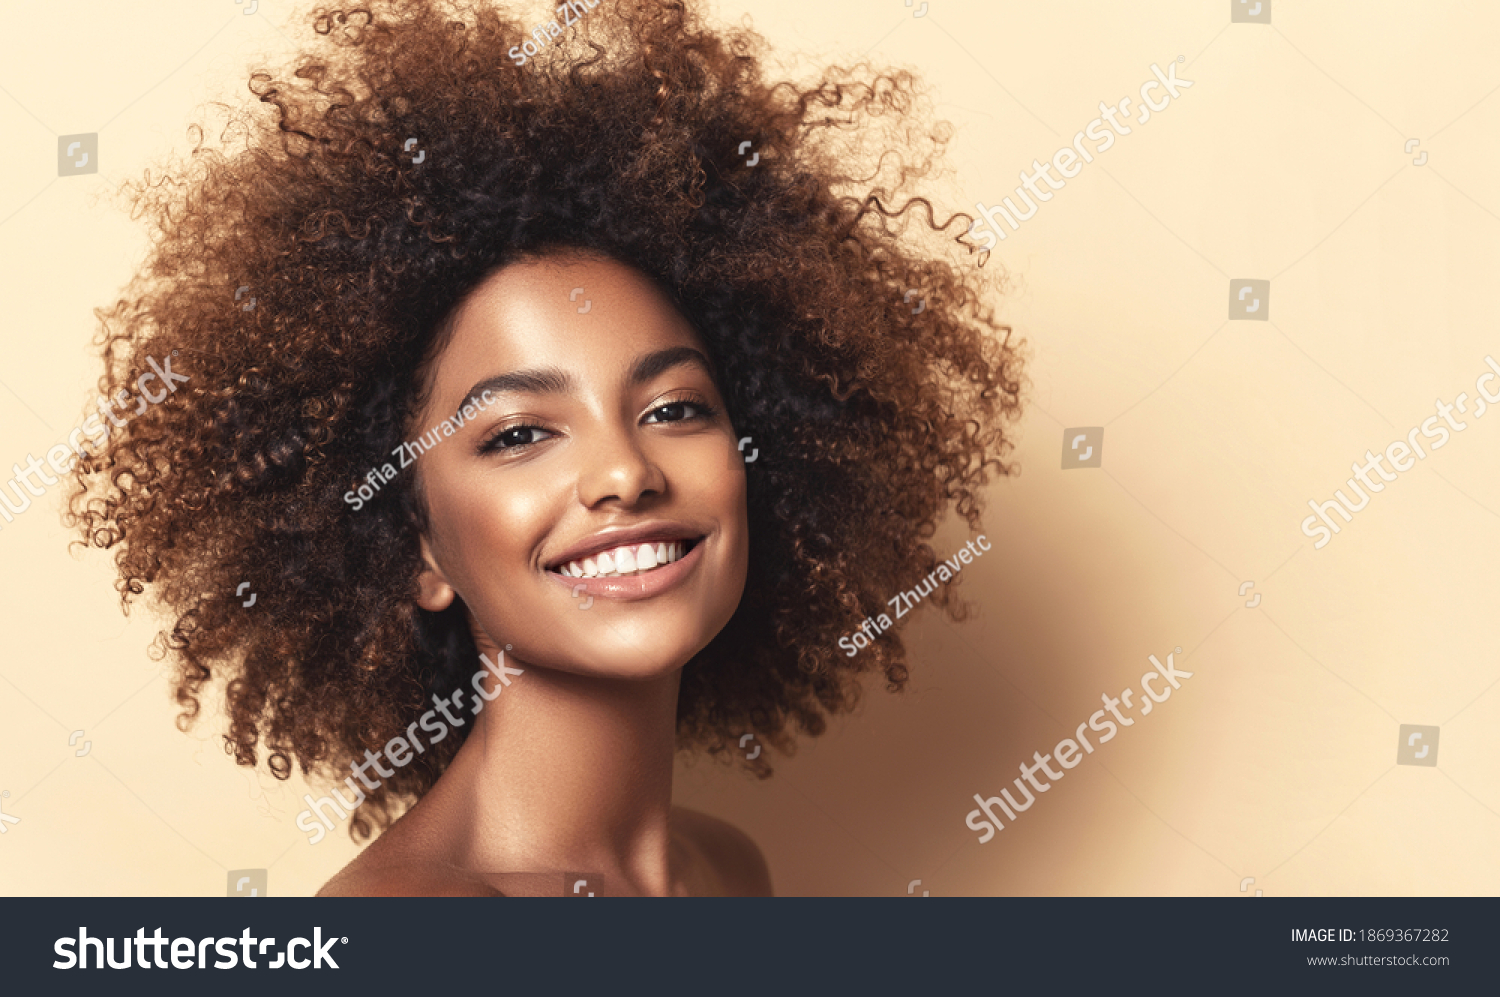 Beauty portrait of african american girl with clean healthy skin on beige background. Smiling dreamy beautiful black woman.Curly hair in afro style #1869367282